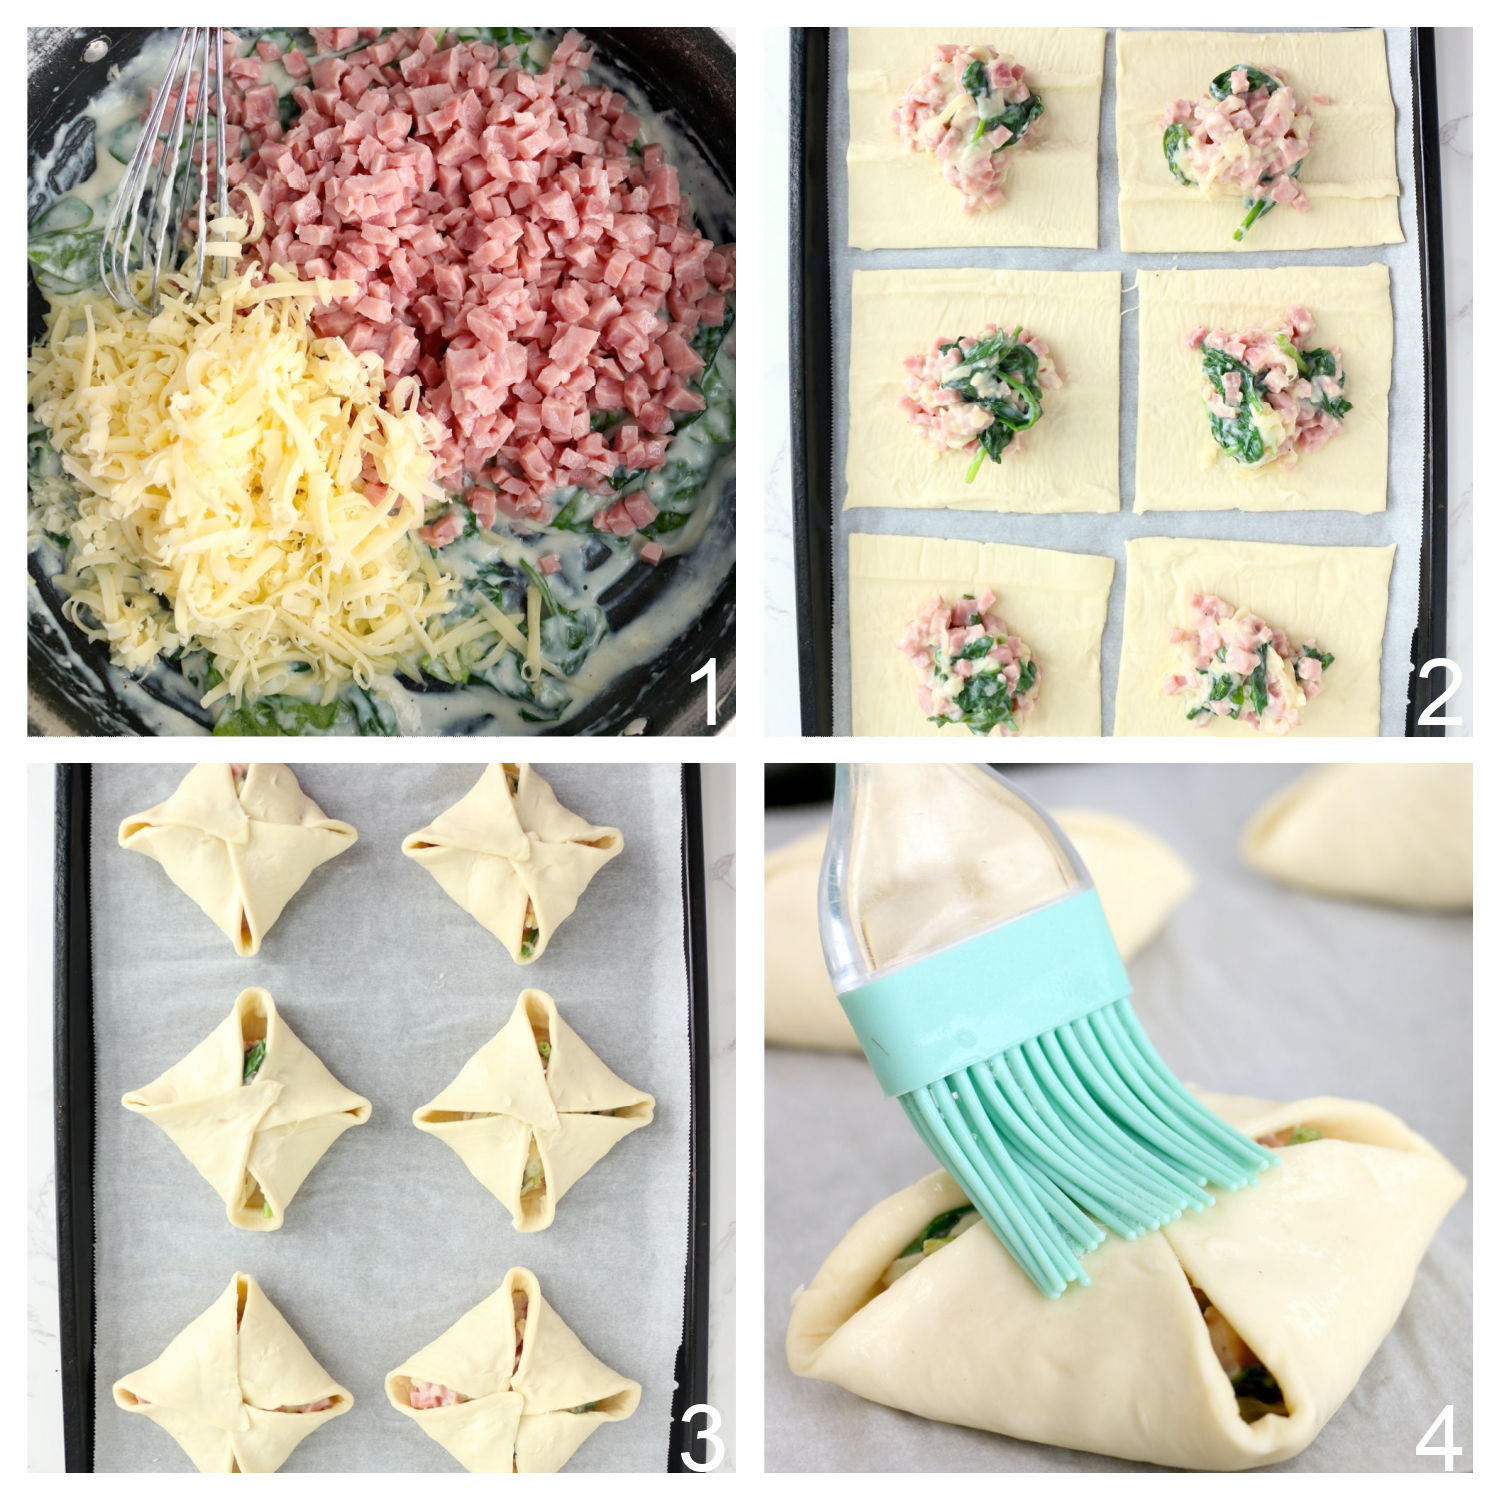 steps for filling puff pastries